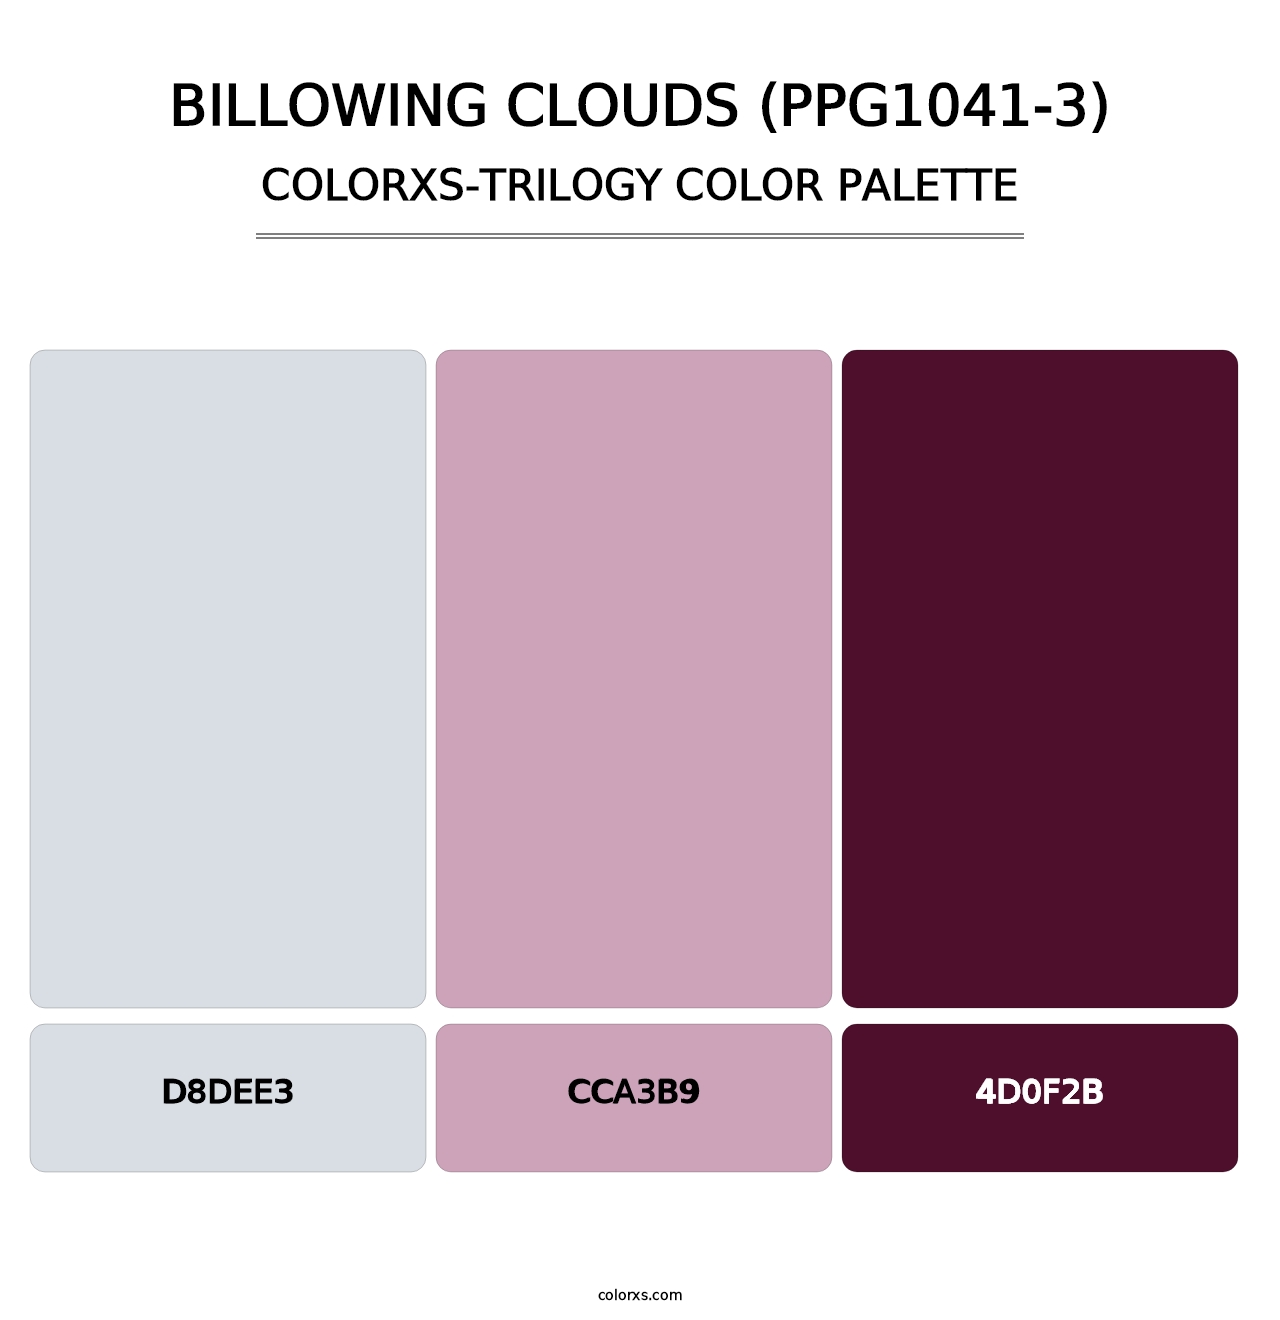 Billowing Clouds (PPG1041-3) - Colorxs Trilogy Palette